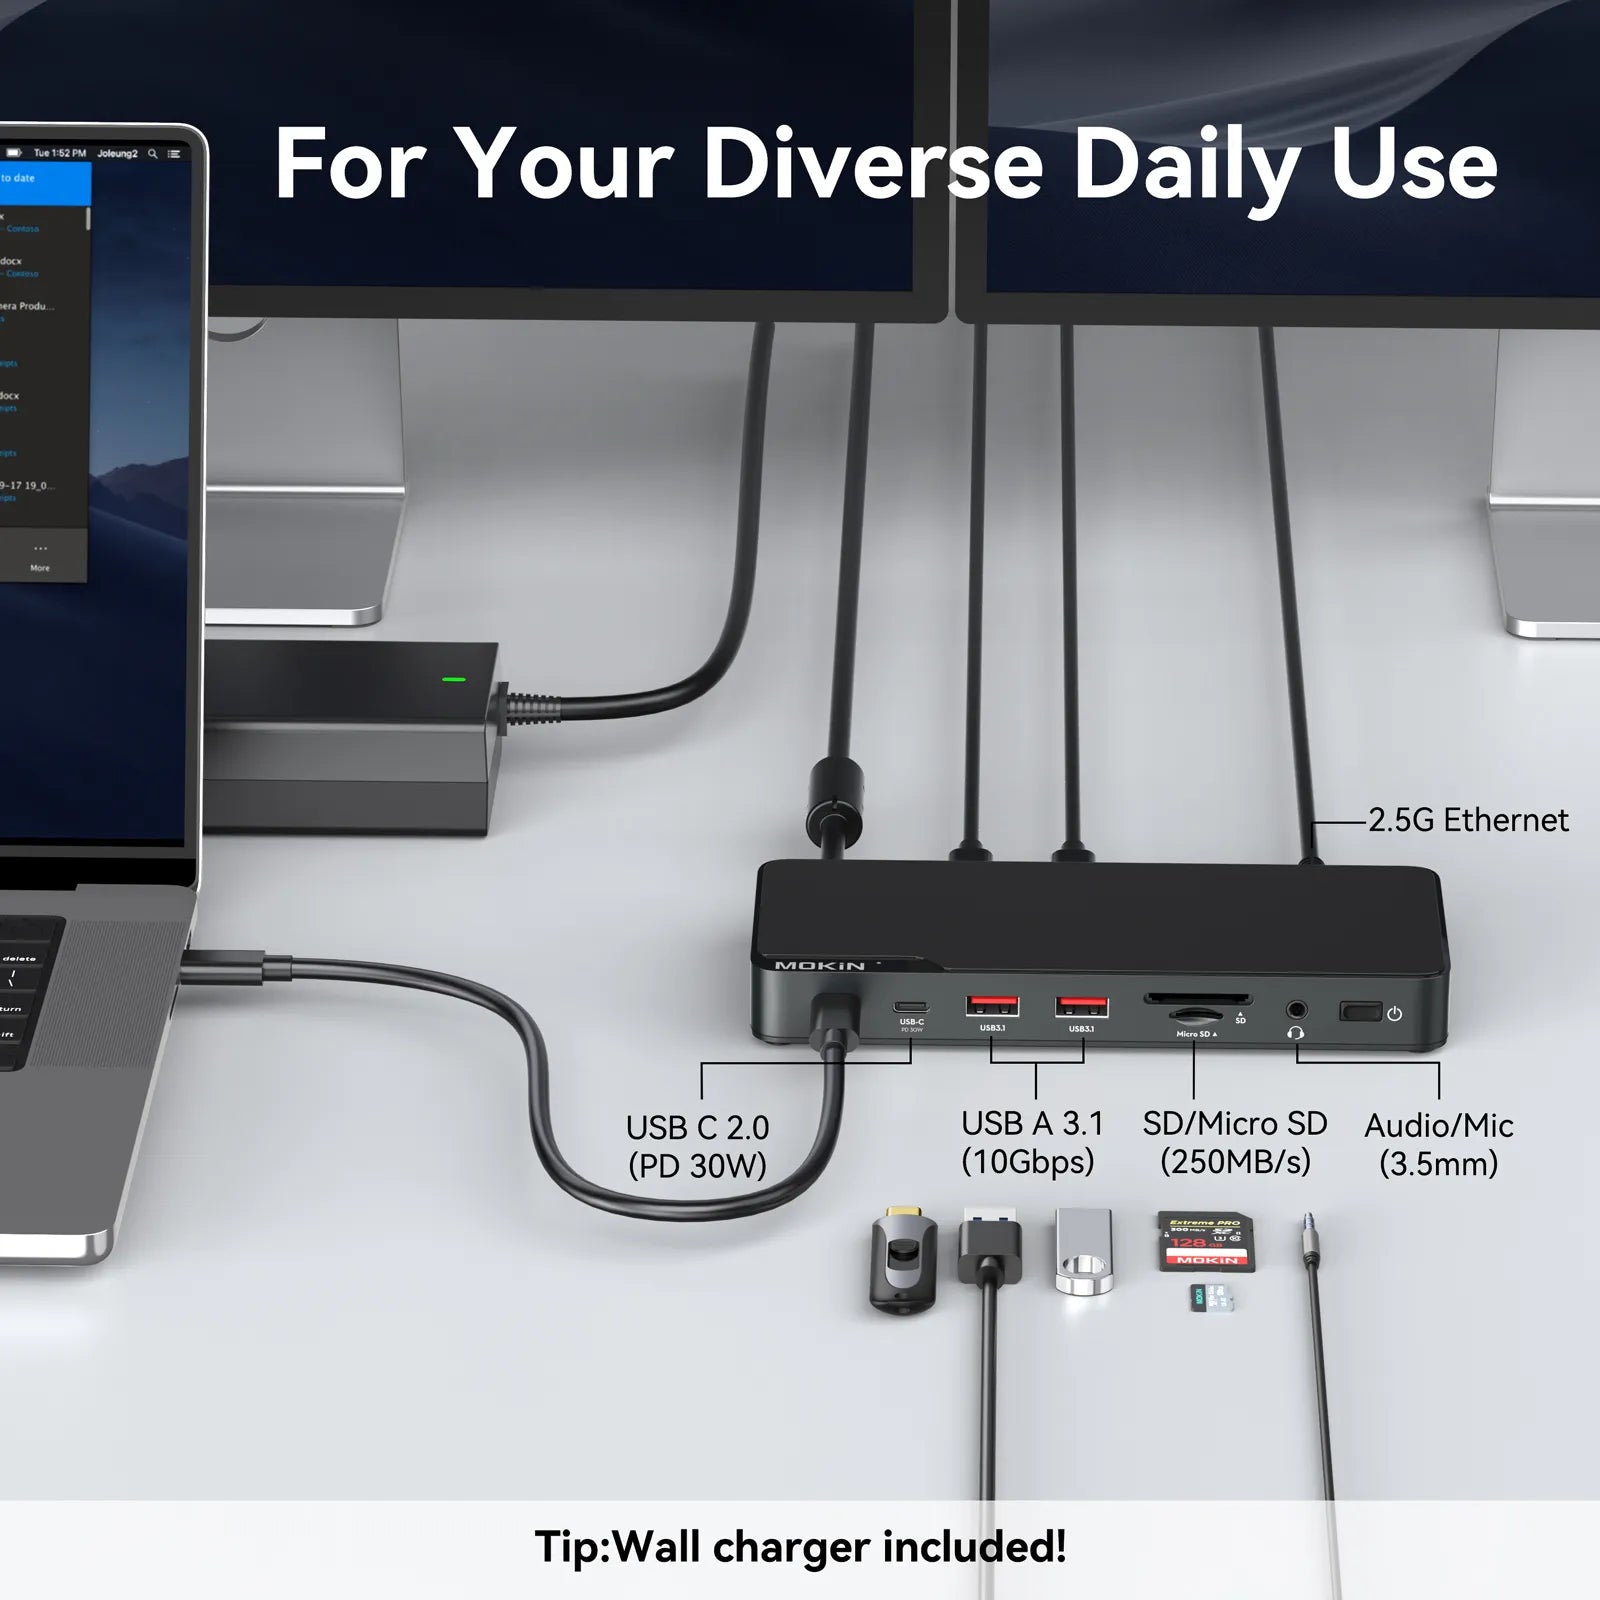 Thunderbolt 4 Dock for your diverse daily use